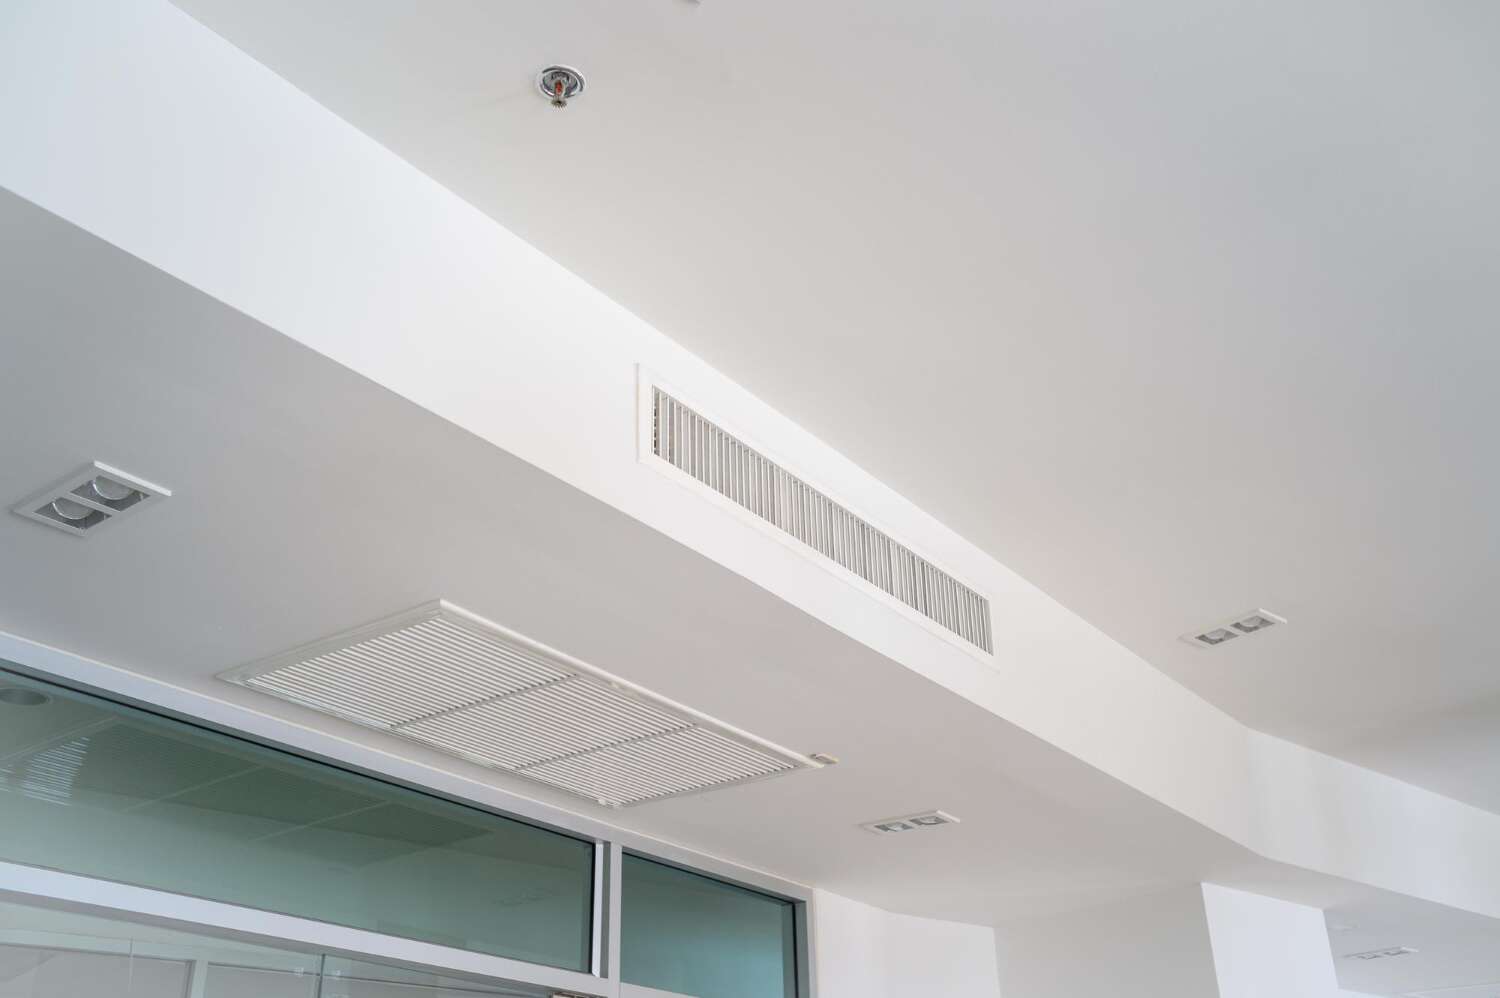 A series of air vents on a rectilinear ceiling.